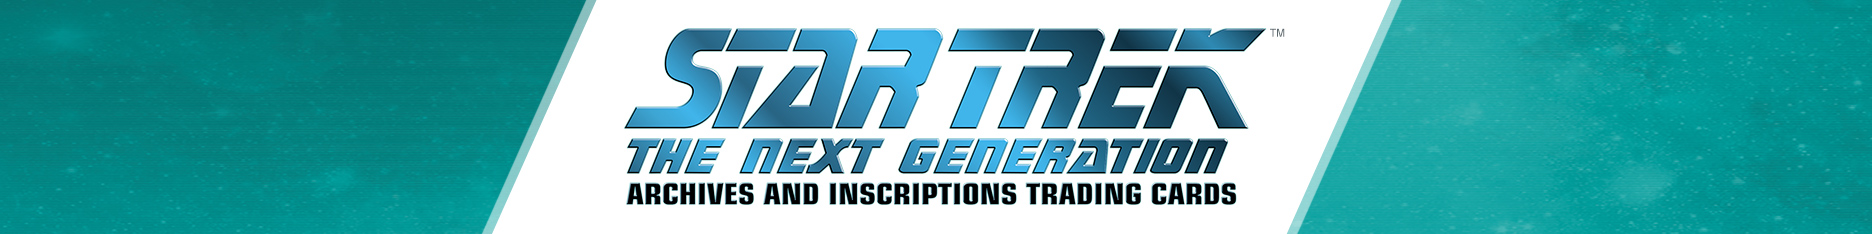 Star Trek: The Next Generation Archives and Inscriptions Trading Cards